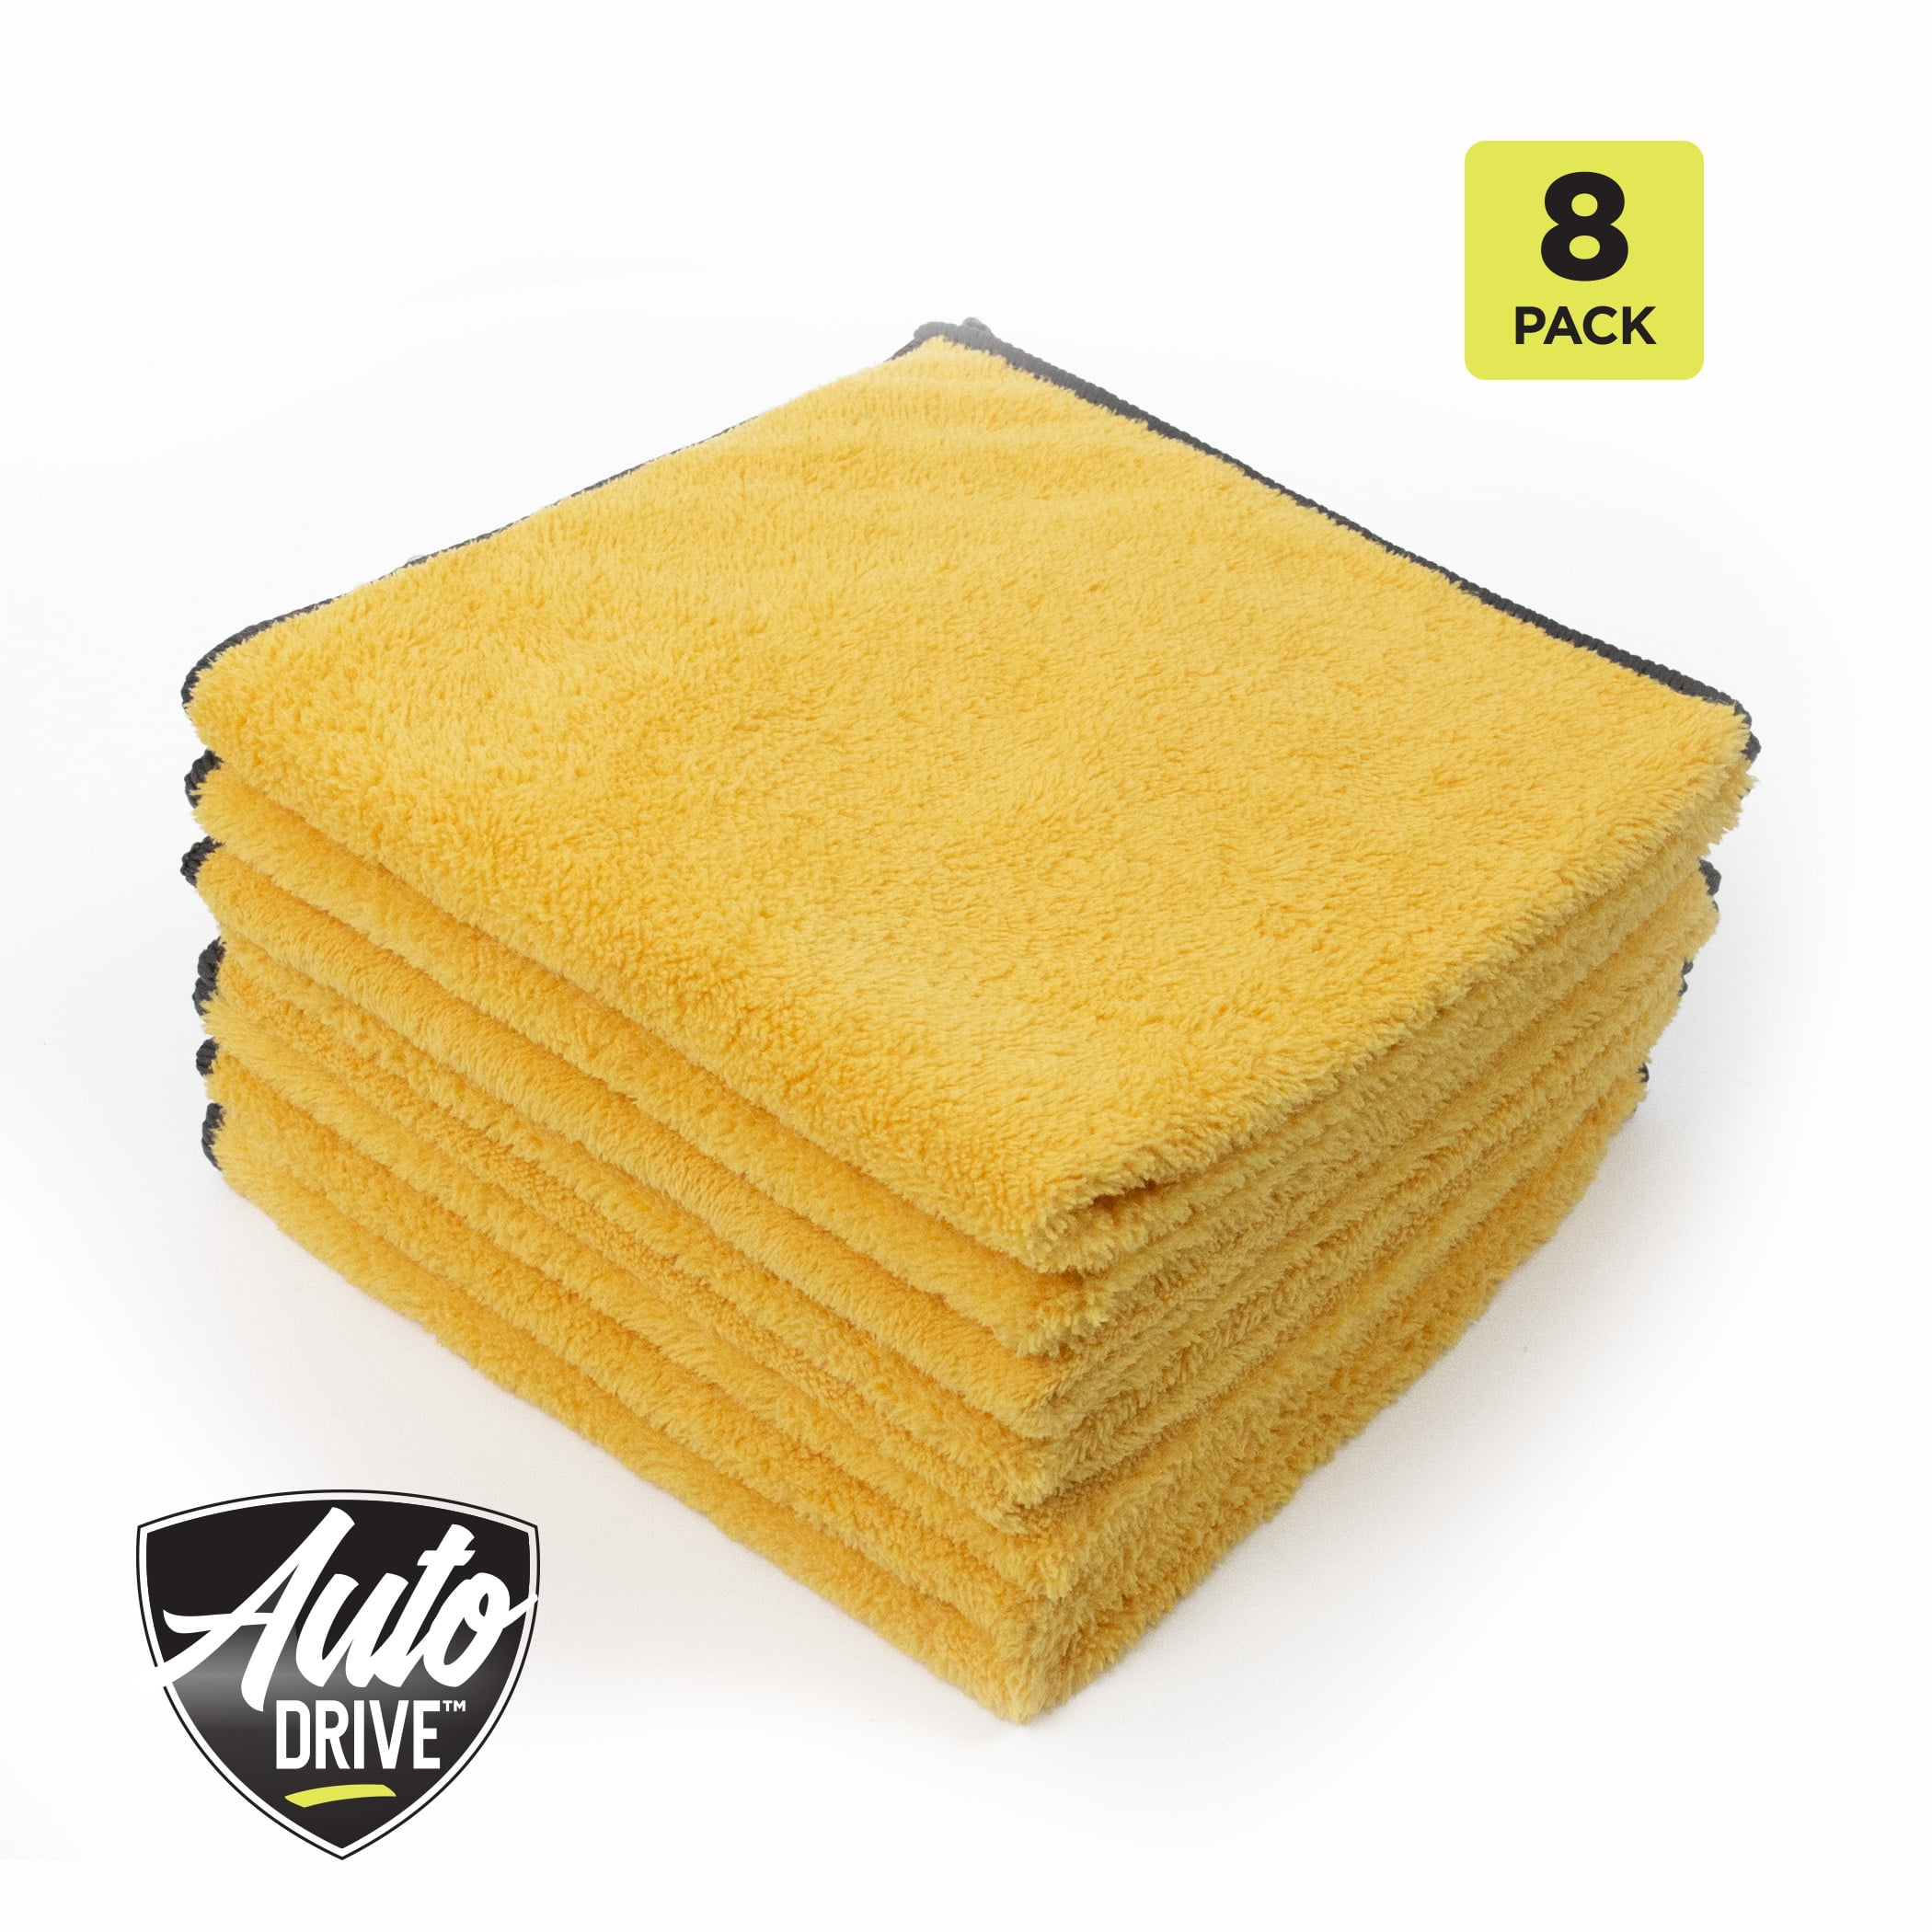 Multipurpose Plush Coral Fleece Cleaning Cloth Towel for Household, Car  Washing, Drying & Auto Detailing - Water Absorption Microfiber Waxing Towel  